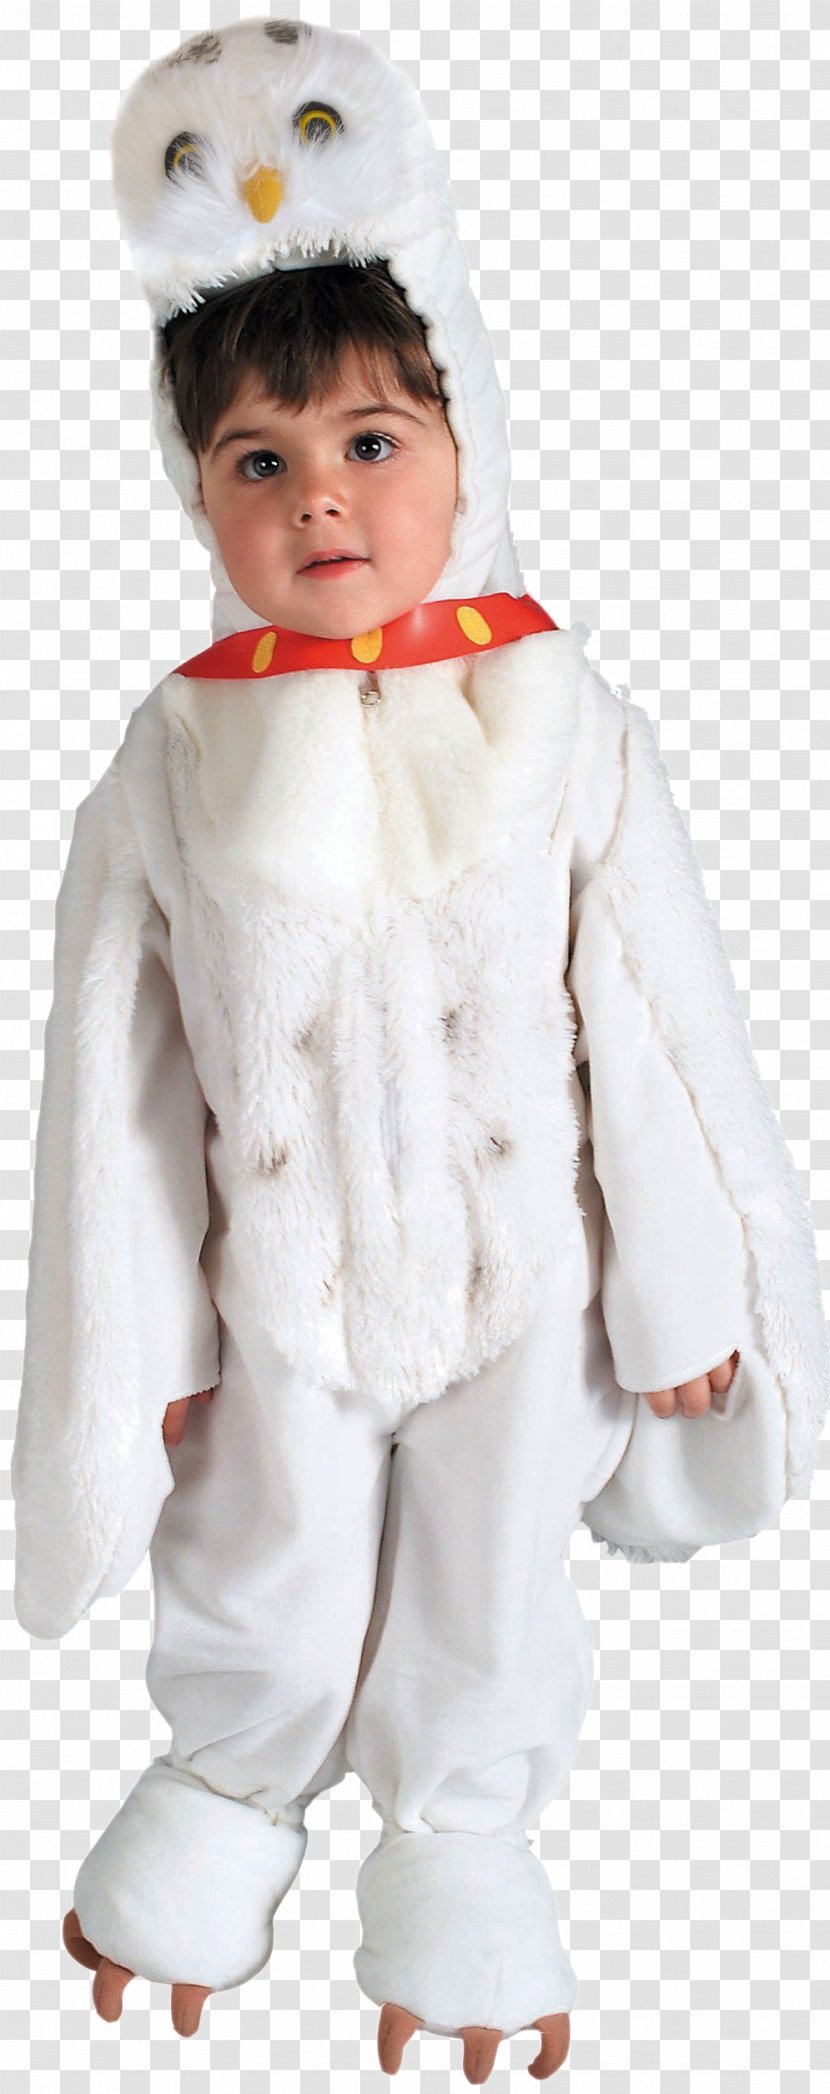 Hermione Granger Hedwig Halloween Costume Albus Dumbledore - Clothing - Child Transparent PNG